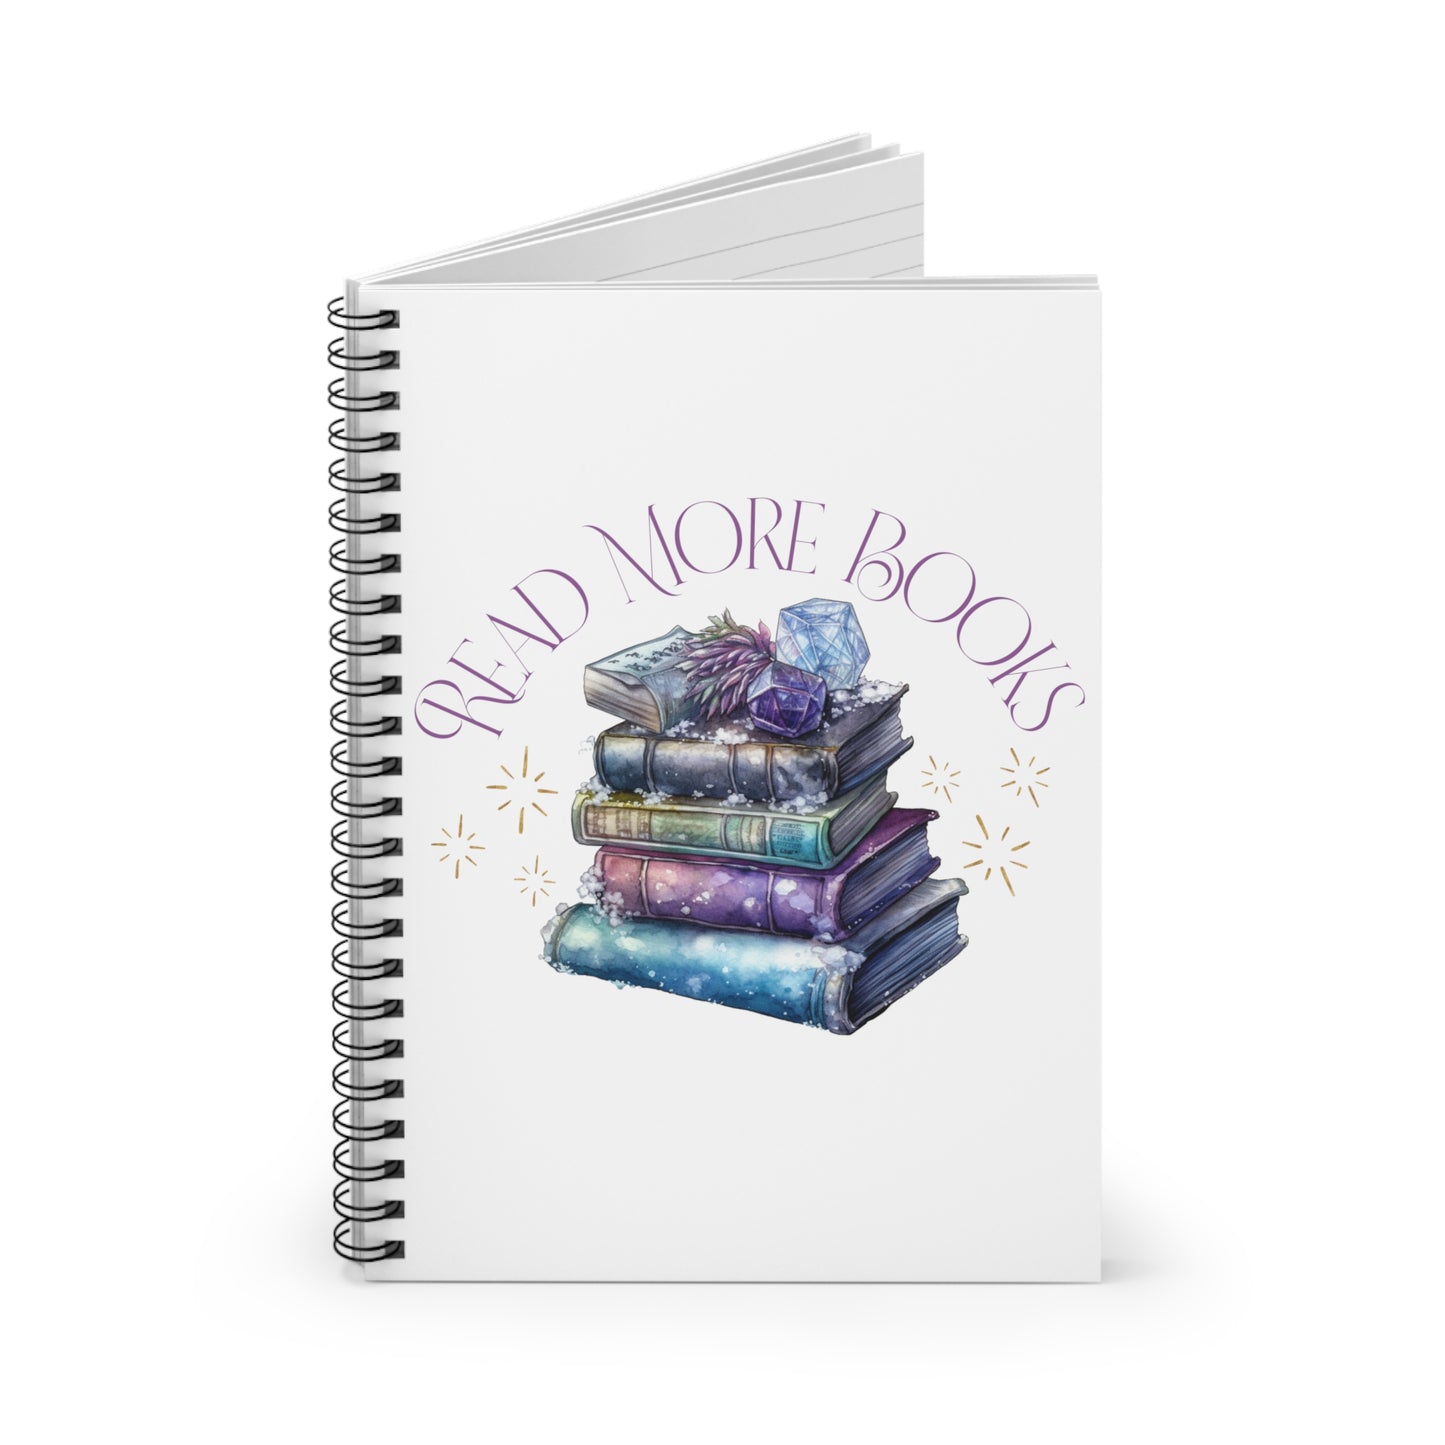 Read More Books Spiral Notebook